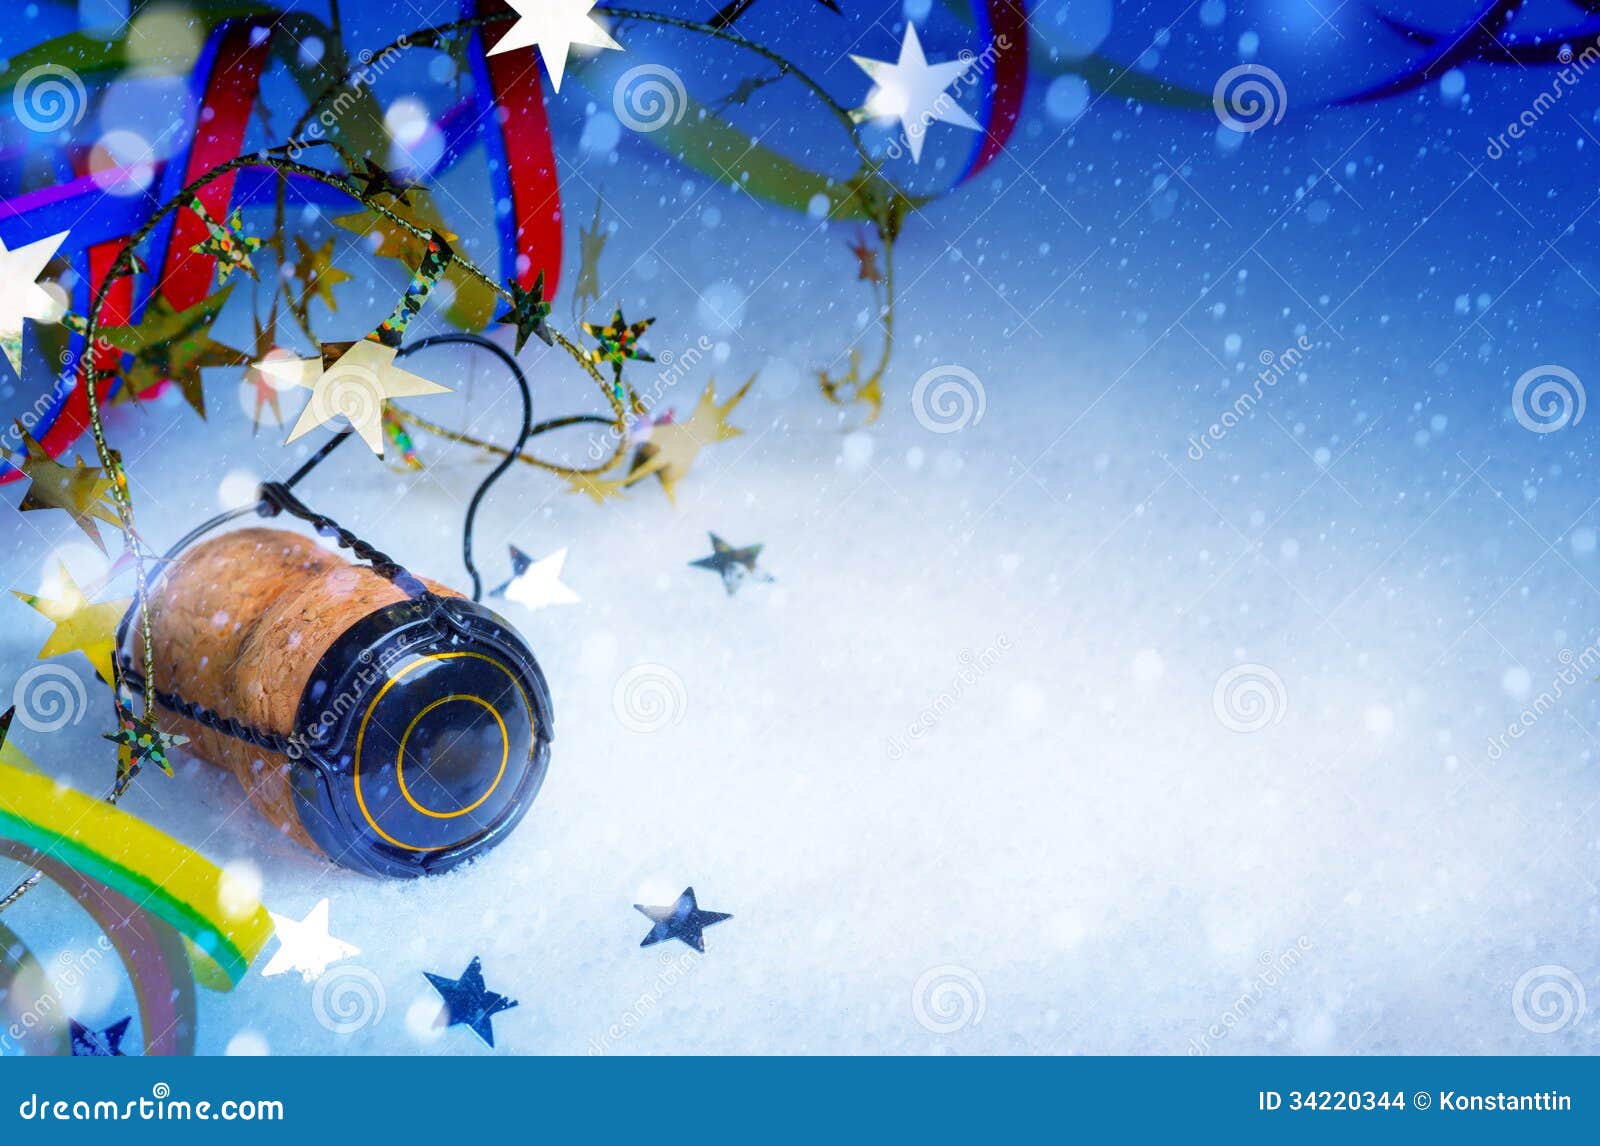 448,930 New Year Party Background Stock Photos - Free & Royalty-Free Stock  Photos from Dreamstime